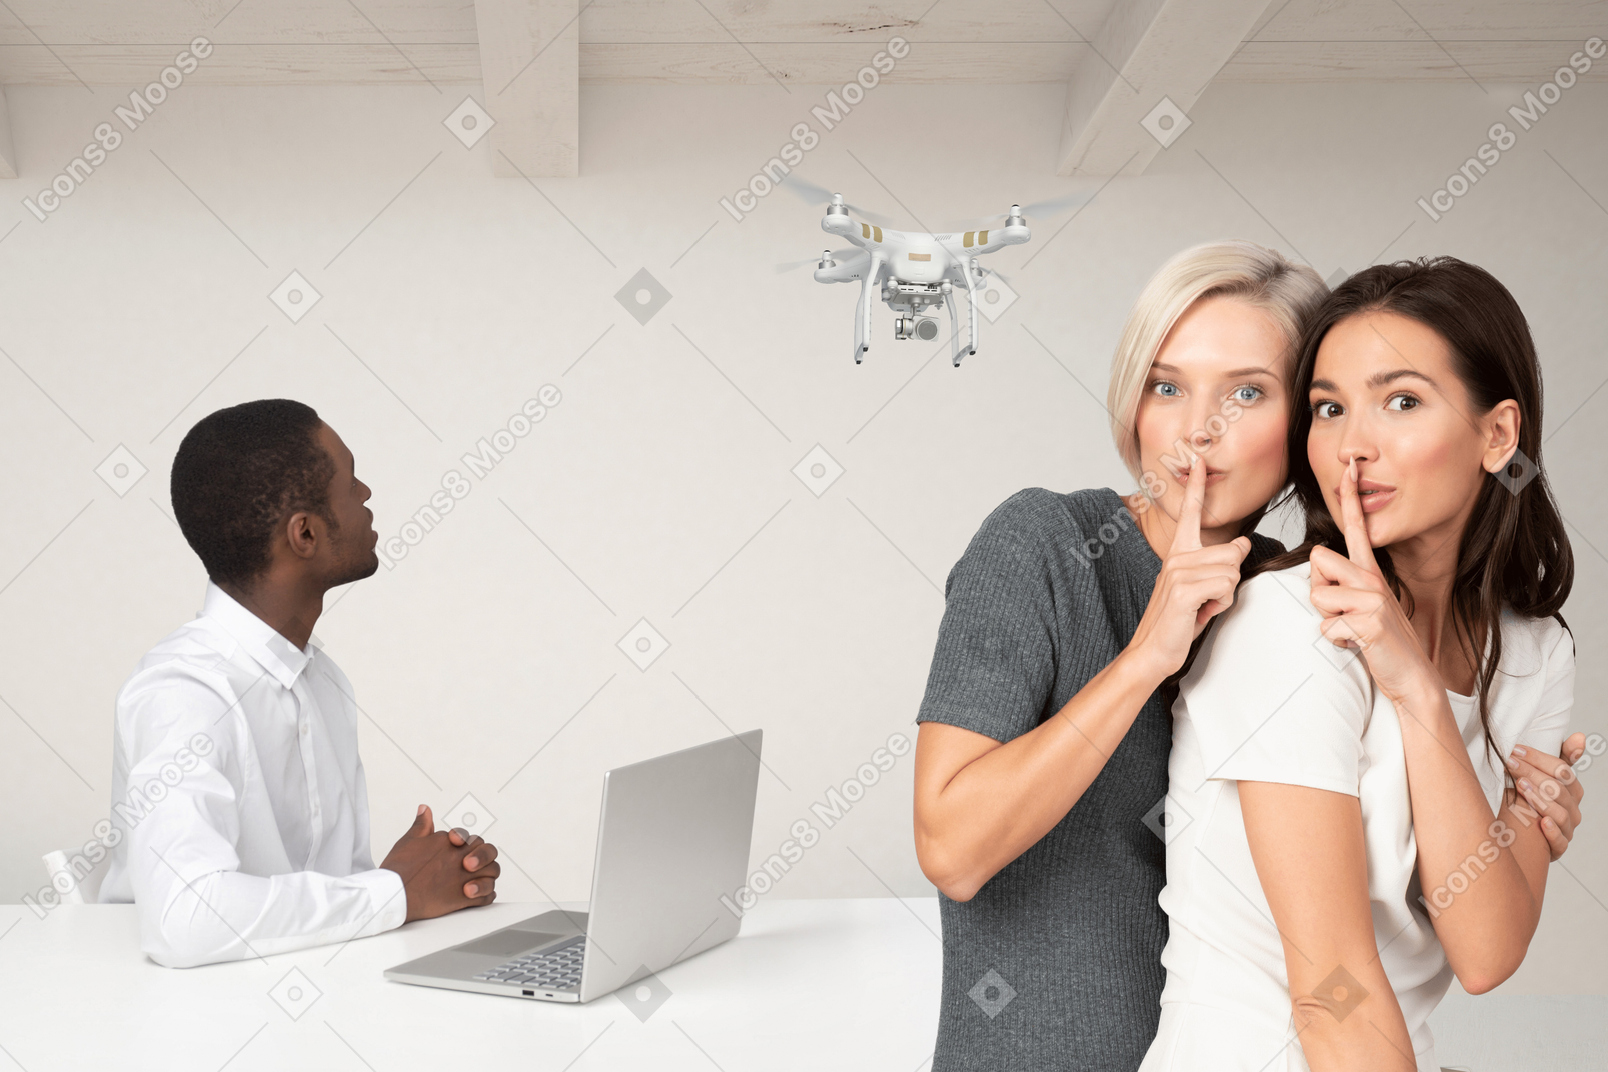 Women ordering a surprise drone delivery to man